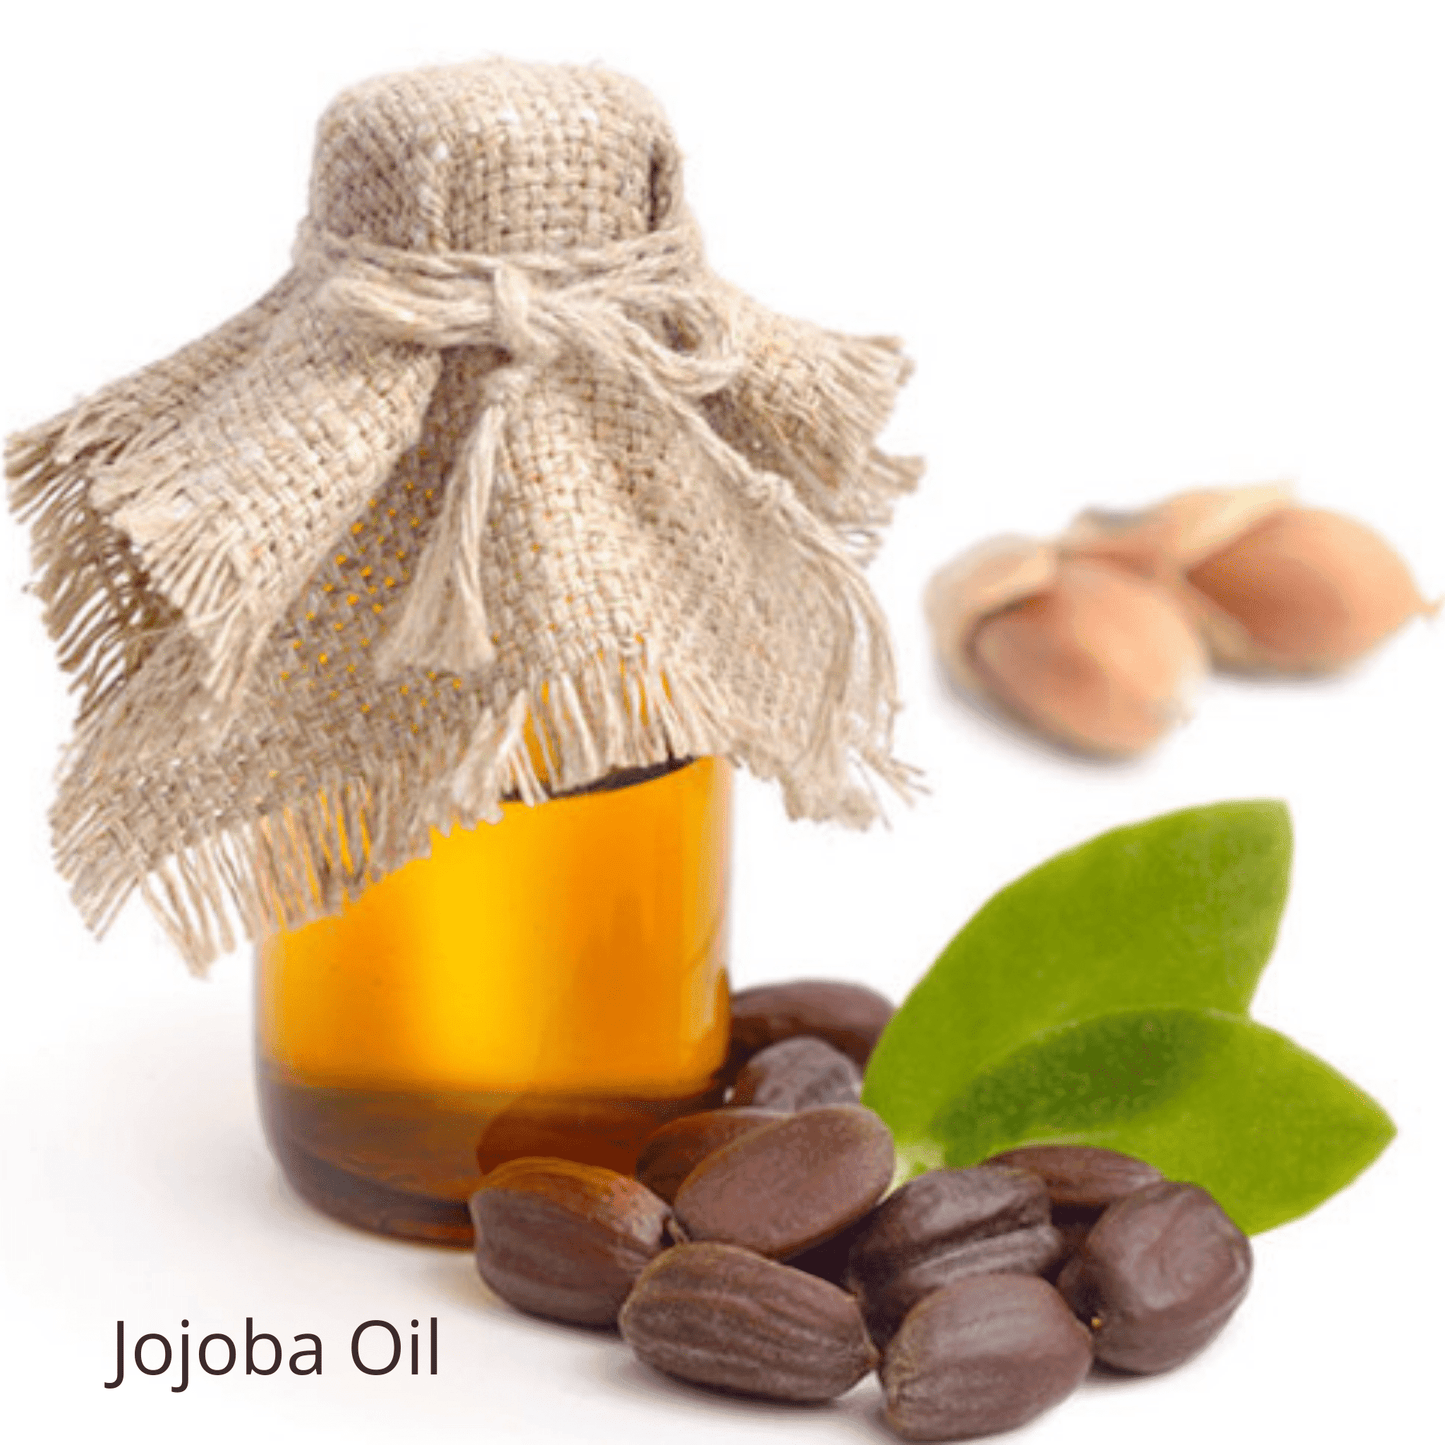 Be Green Bath and Body Shower Gel contains saponified jojoba oil